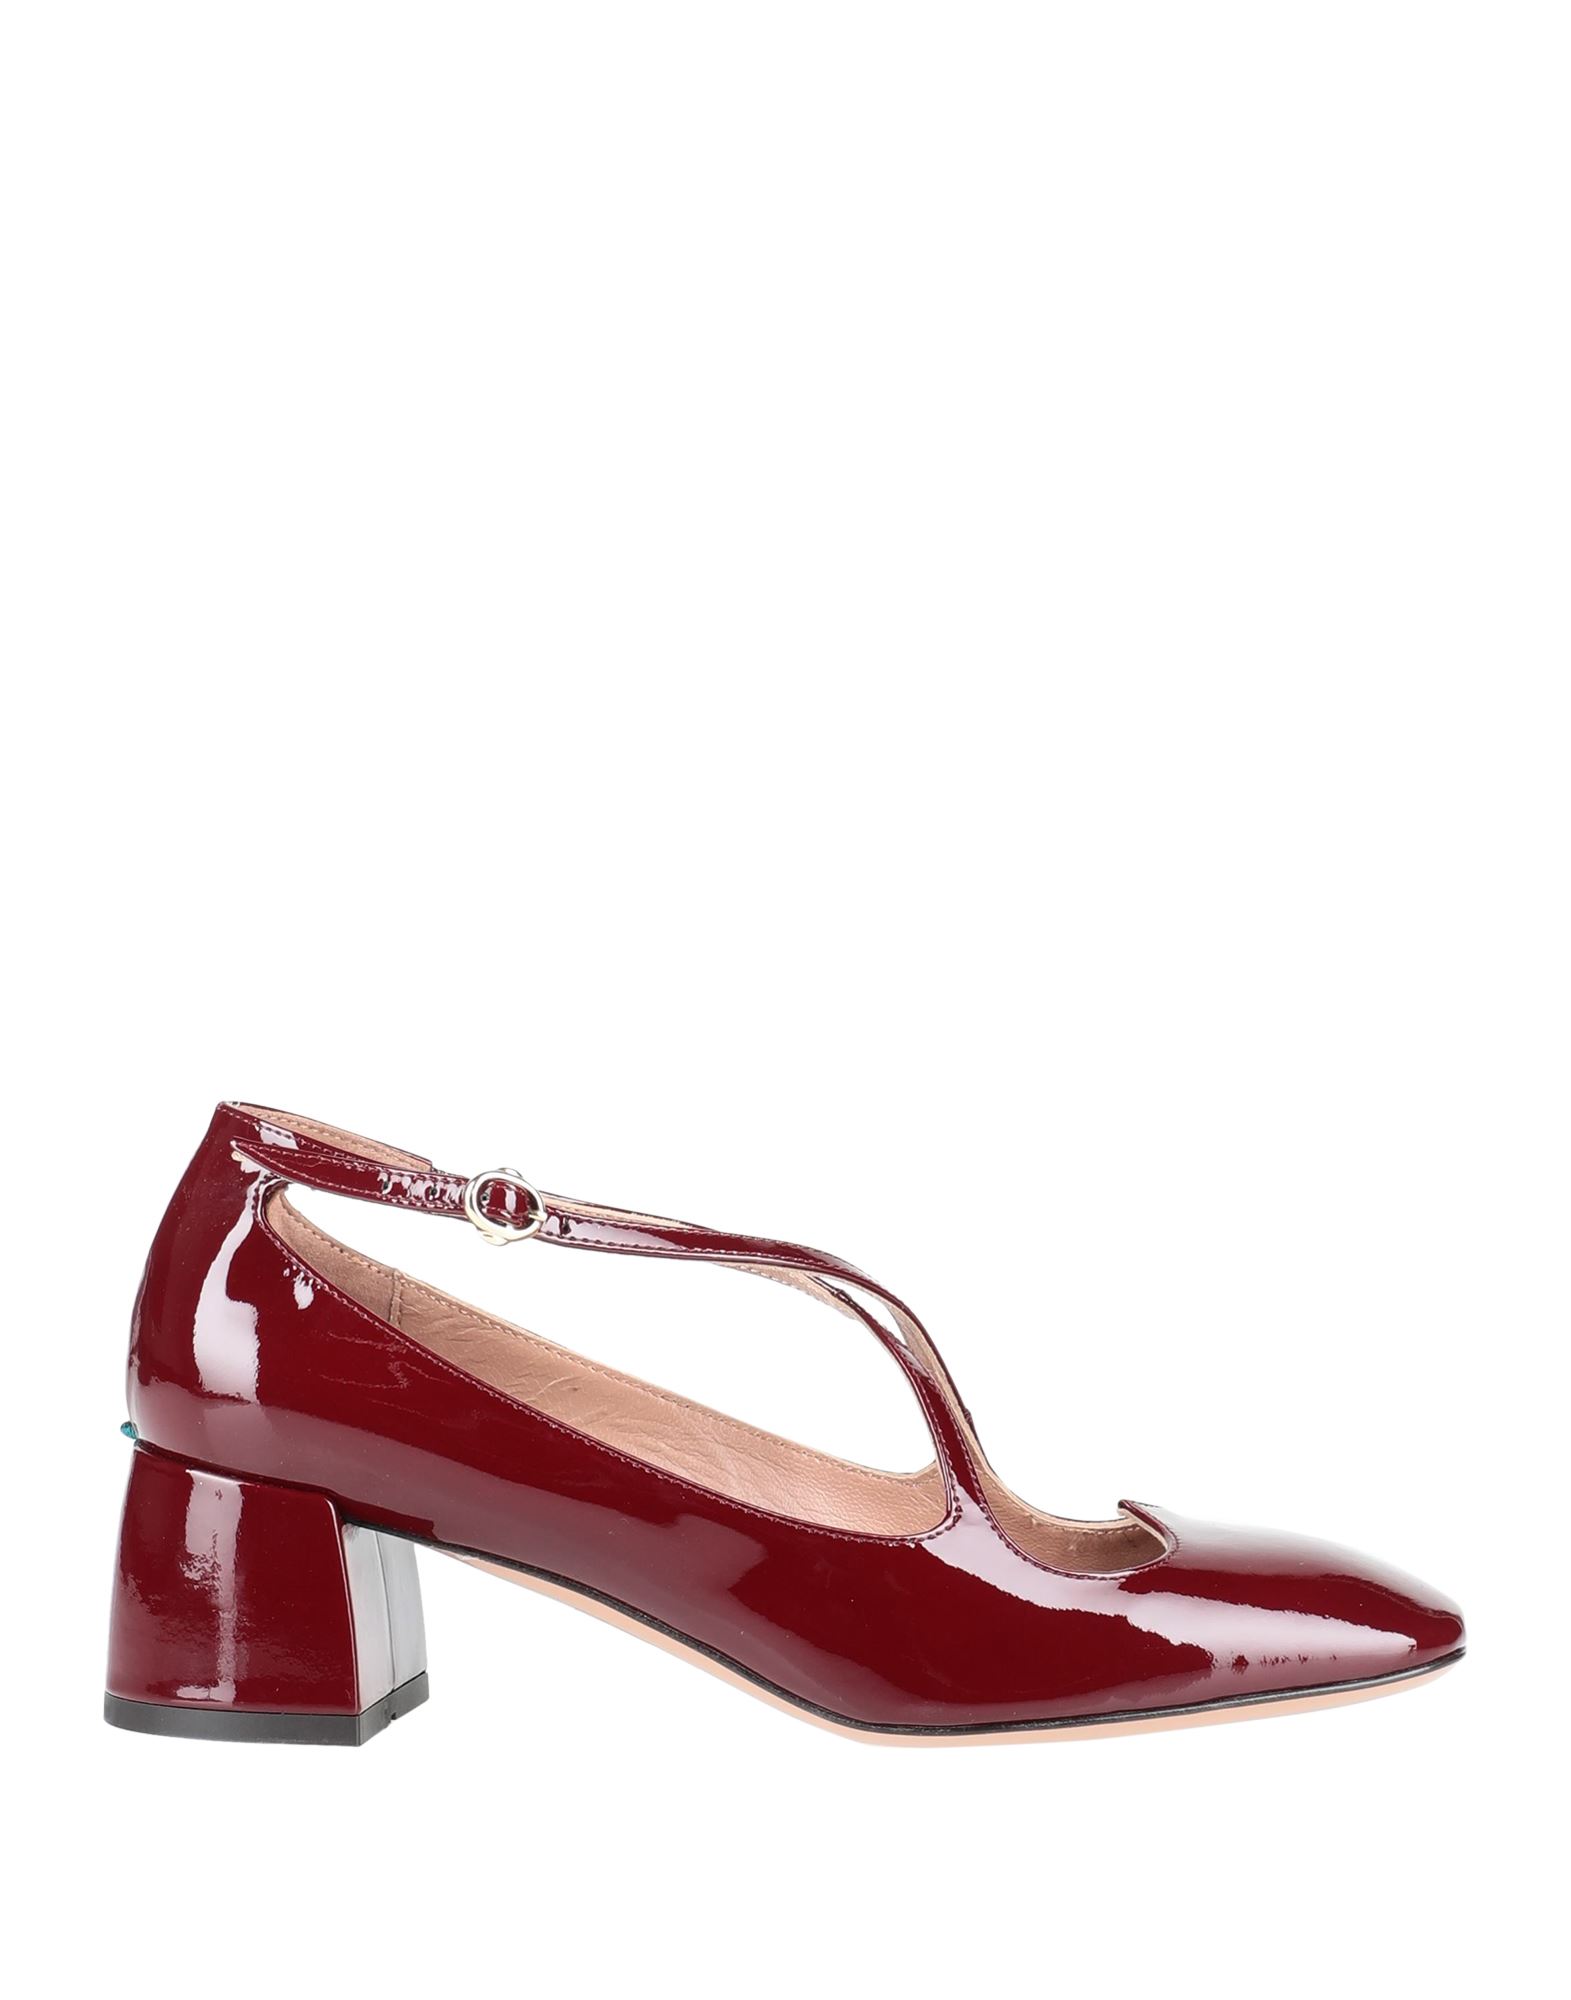 A.bocca Pumps In Maroon